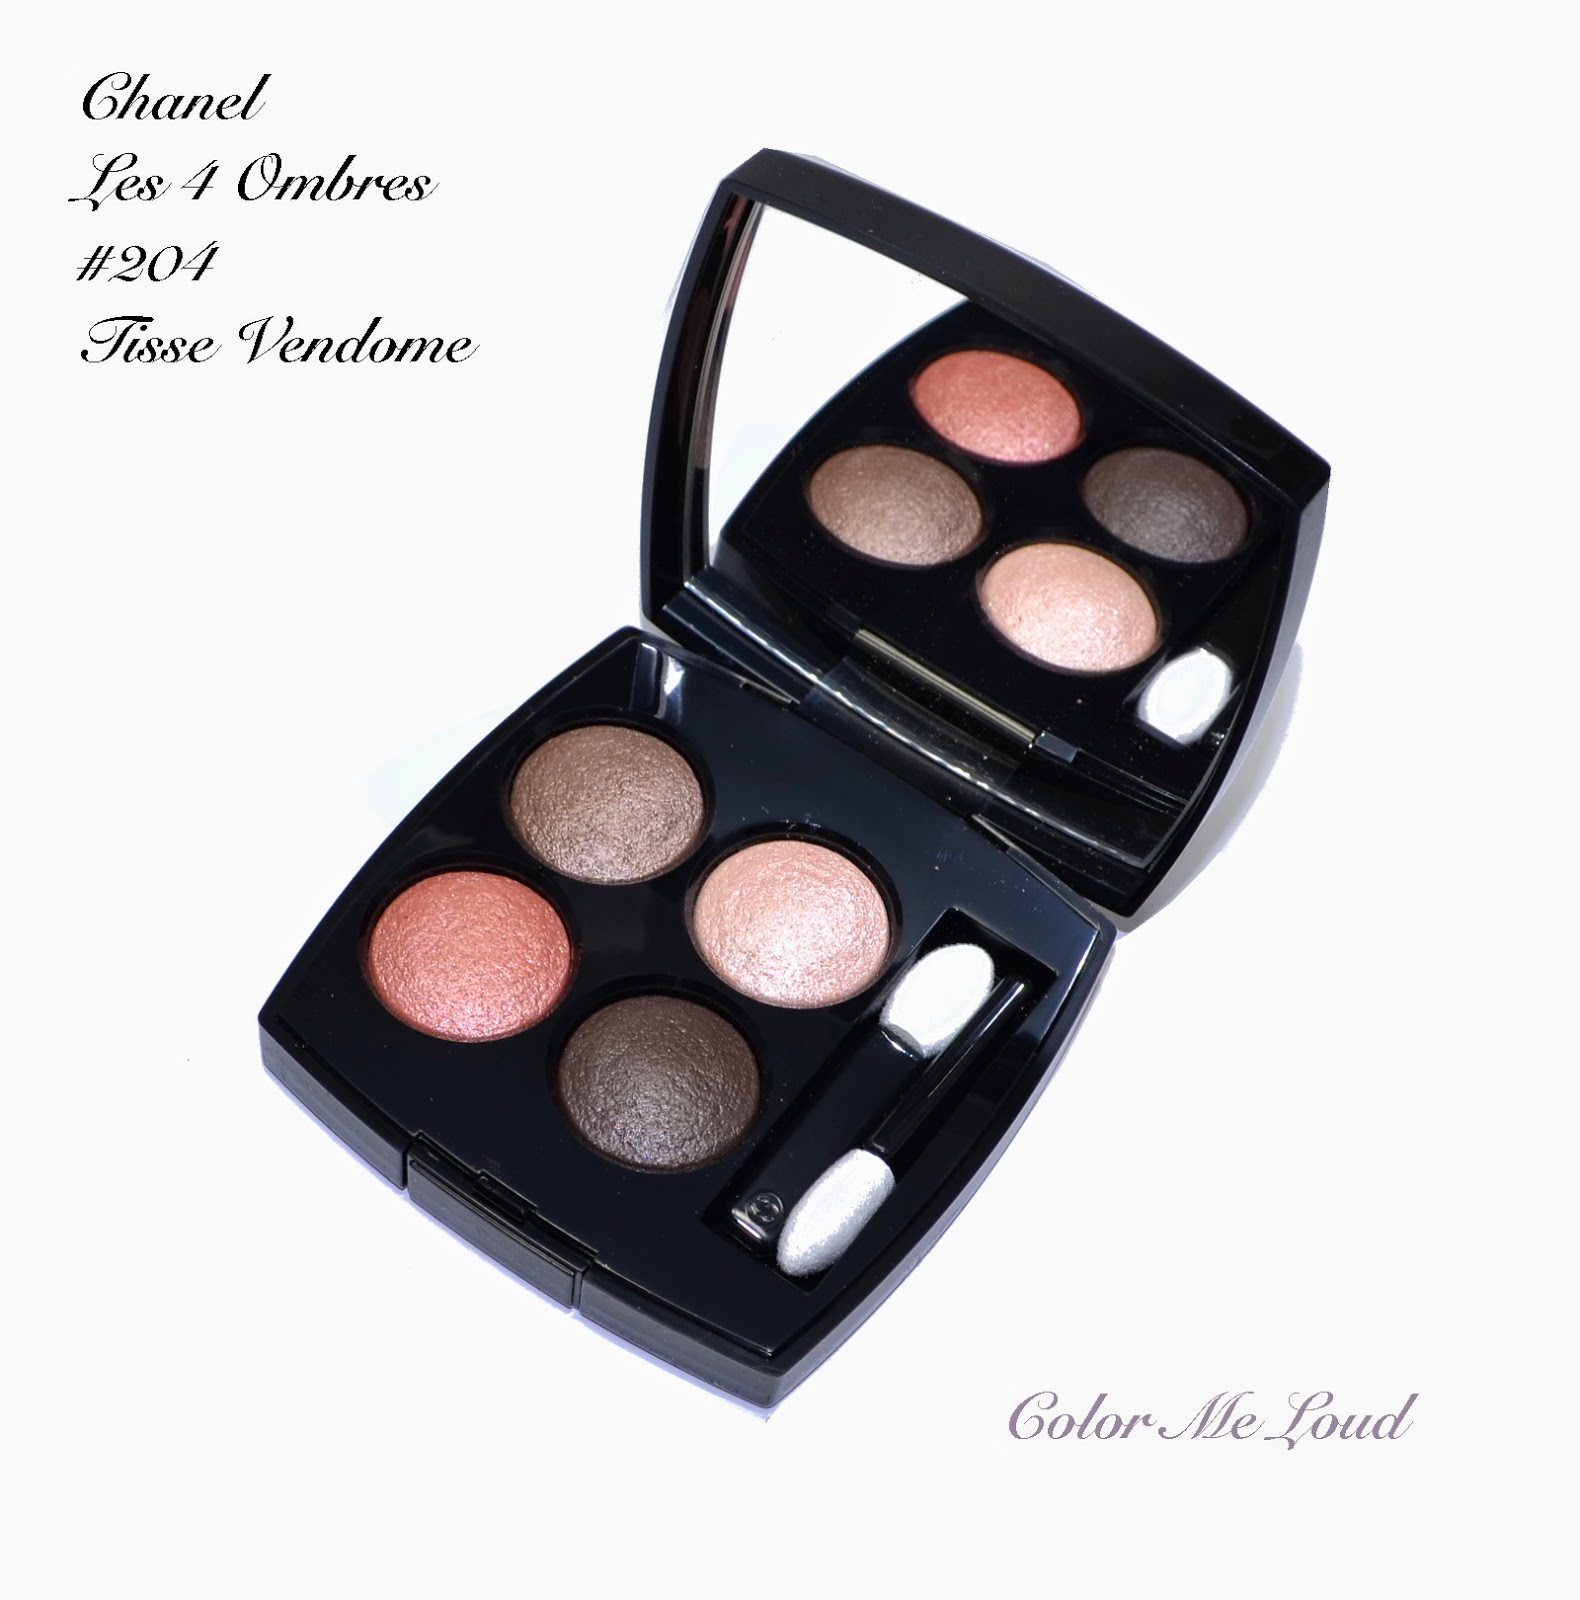 Chanel eyeshadow review